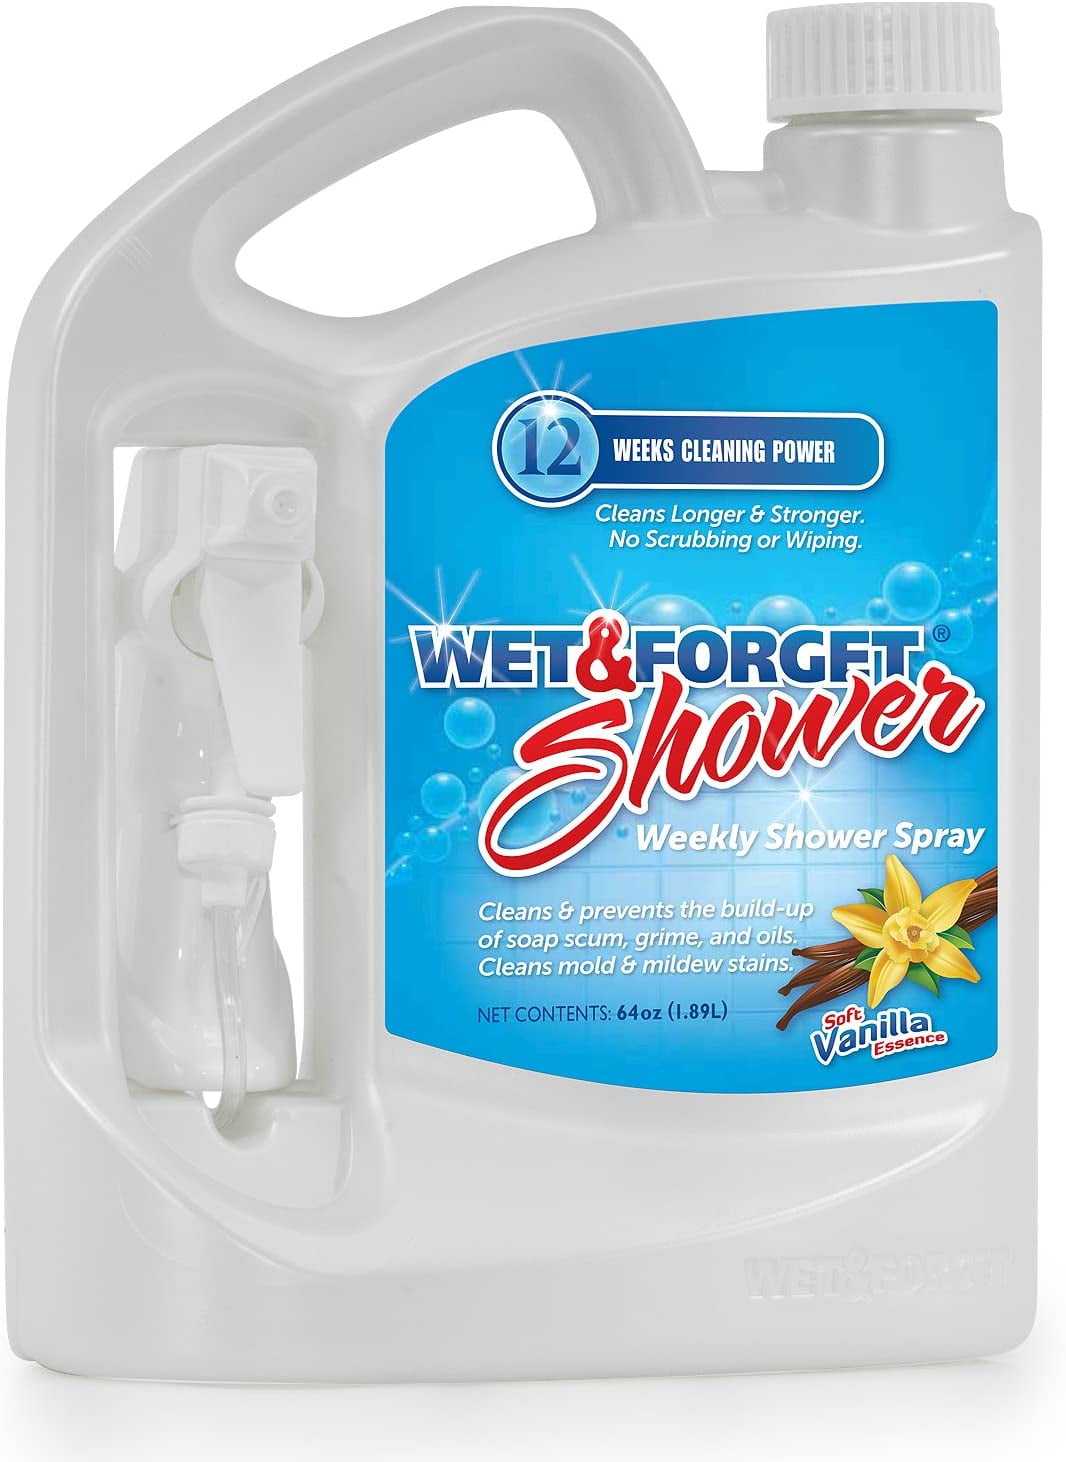 Scrubbing the shower? Fuggetaboutit! - Wet And Forget #shower #wetand